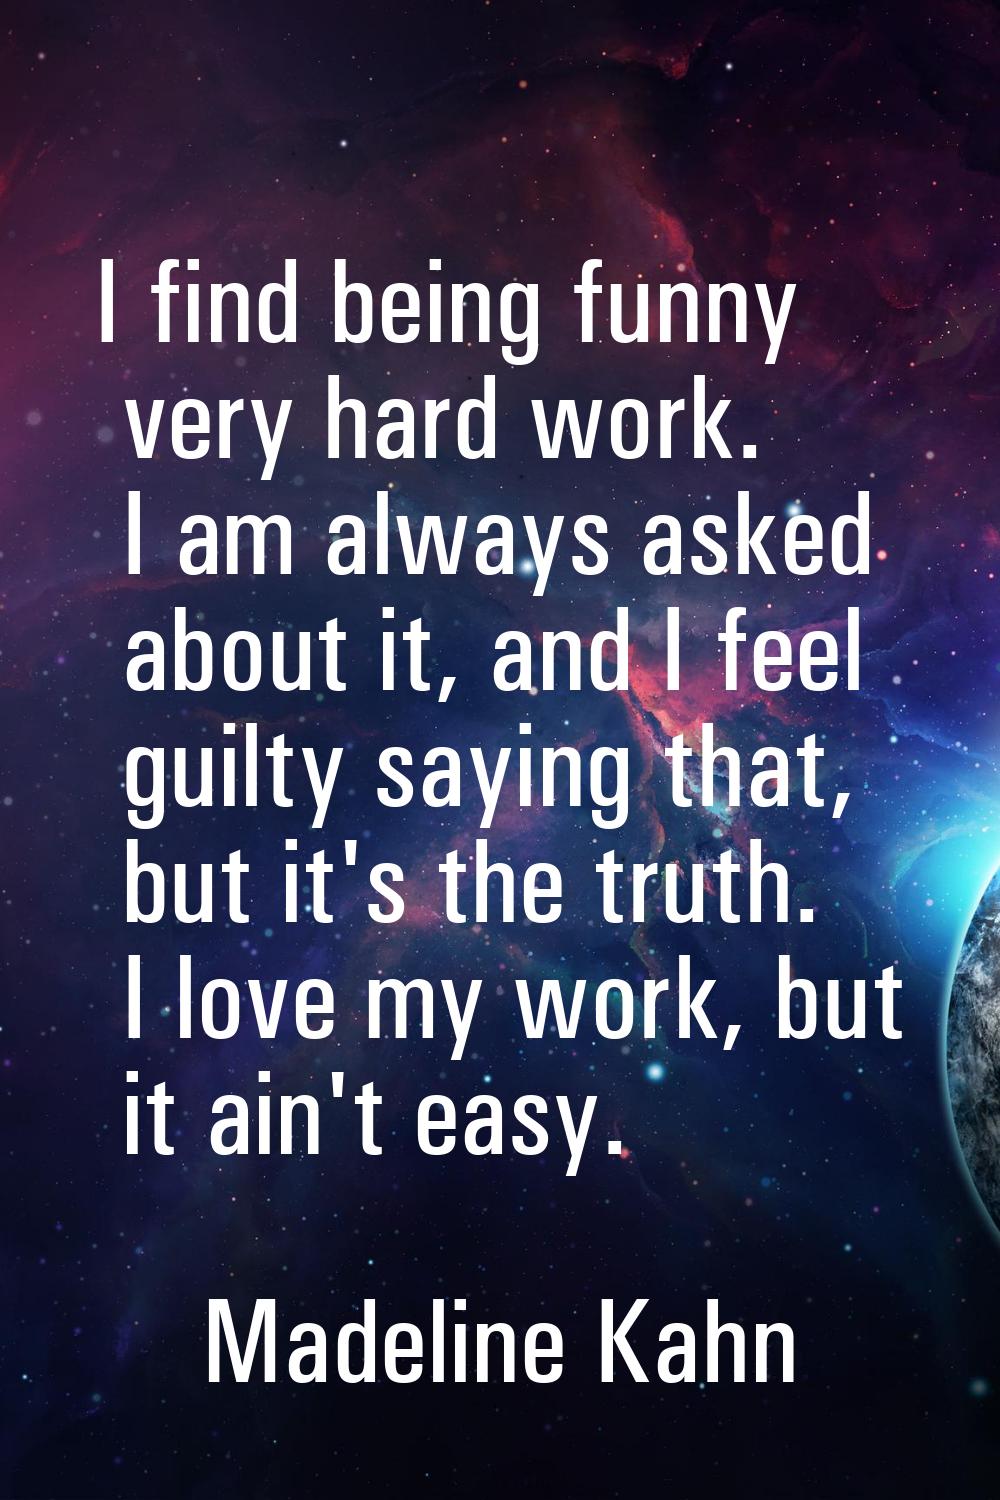 I find being funny very hard work. I am always asked about it, and I feel guilty saying that, but i